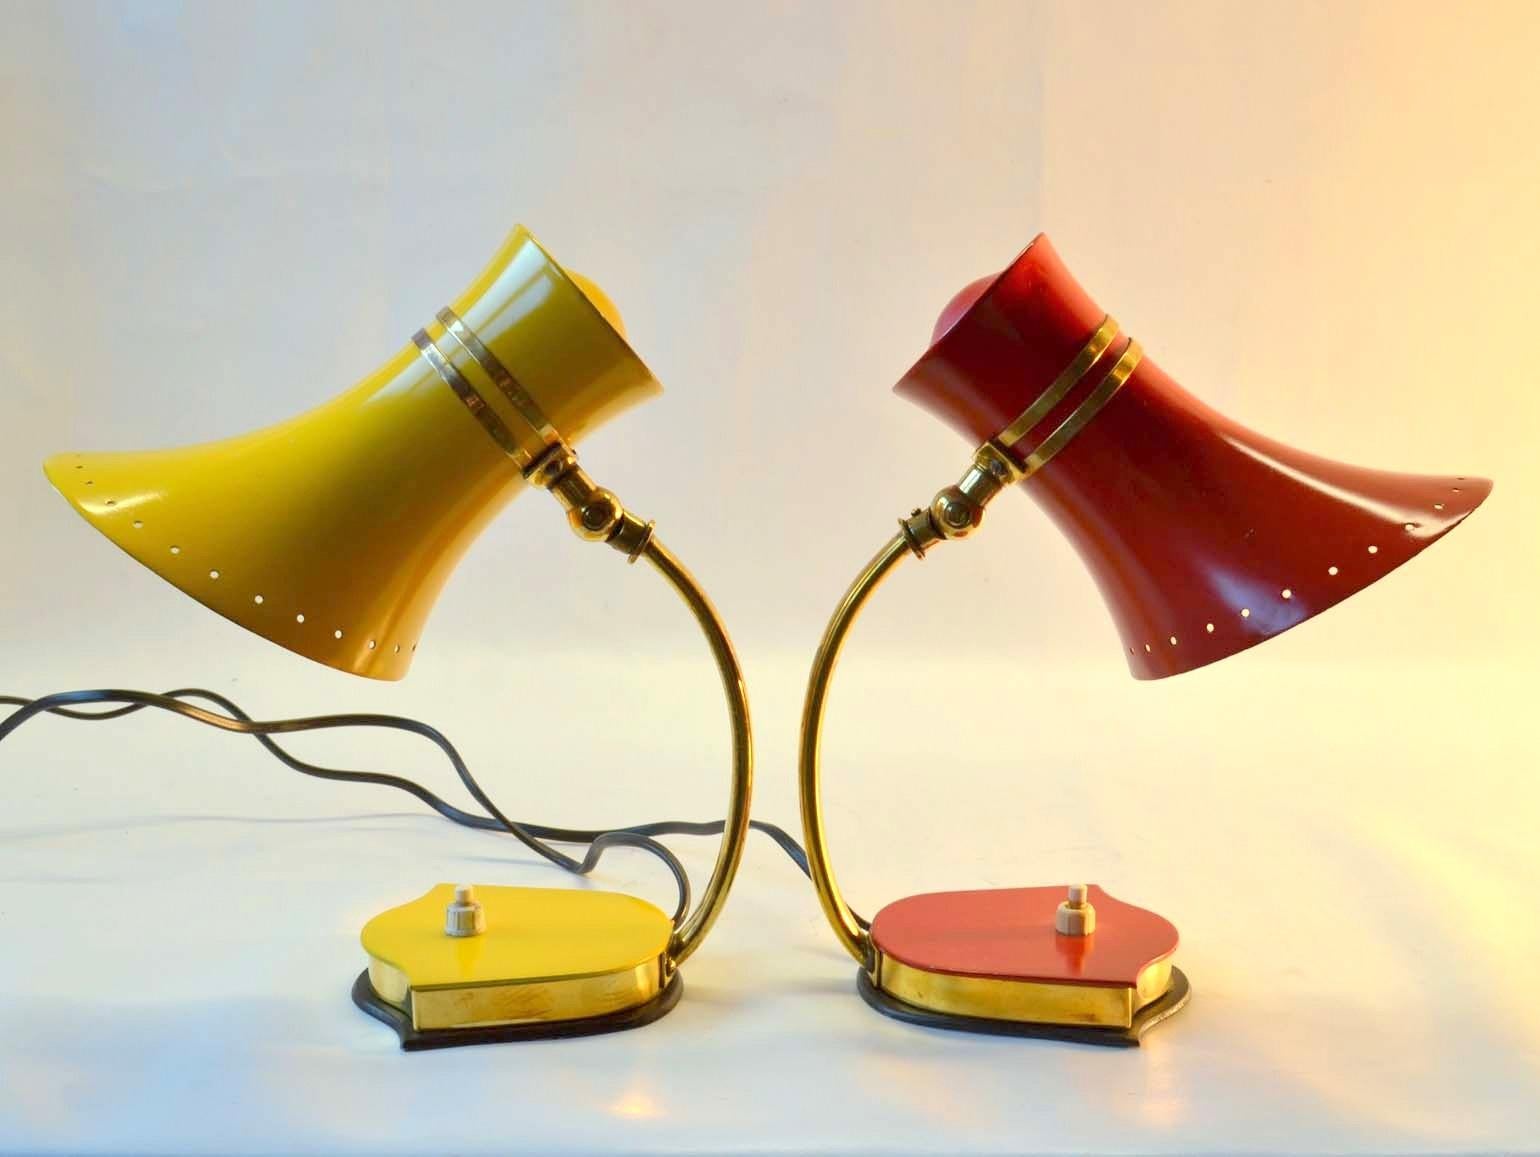 Pair of original Mid-Century Modern Italian red & yellow enameled aluminum & brass bell shape table lamps with adjustable joints to angle the light source. These Italian enameled sconces by Stilnovo were produced in the 1950s-1960s and are vintage